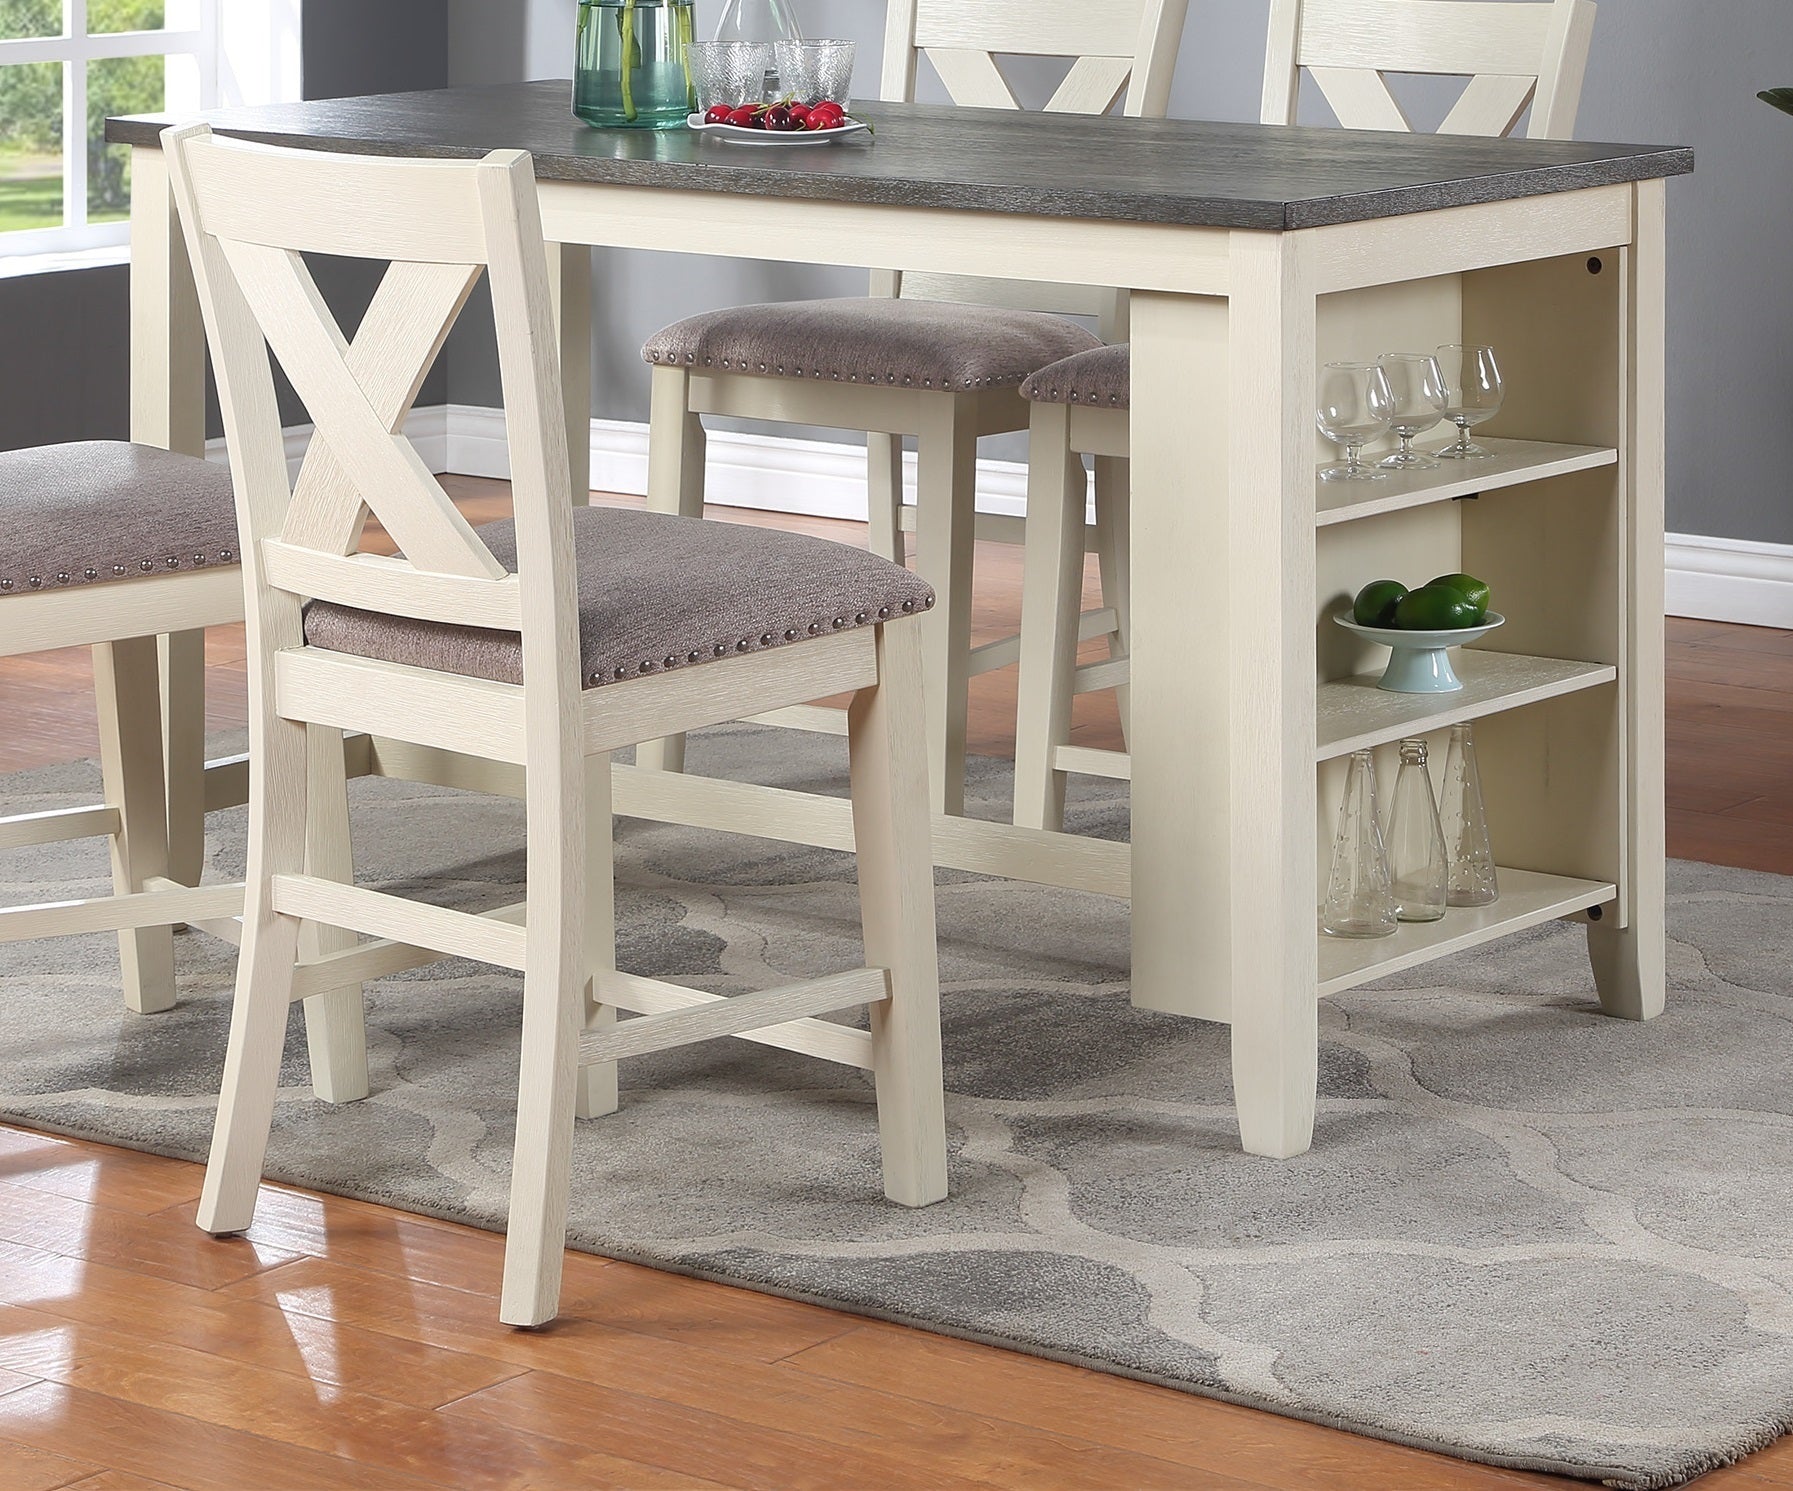 Modern Contemporary 5pc Counter Height High Dining Table wirh Storage Shelves, High Chairs & Stools, Off White